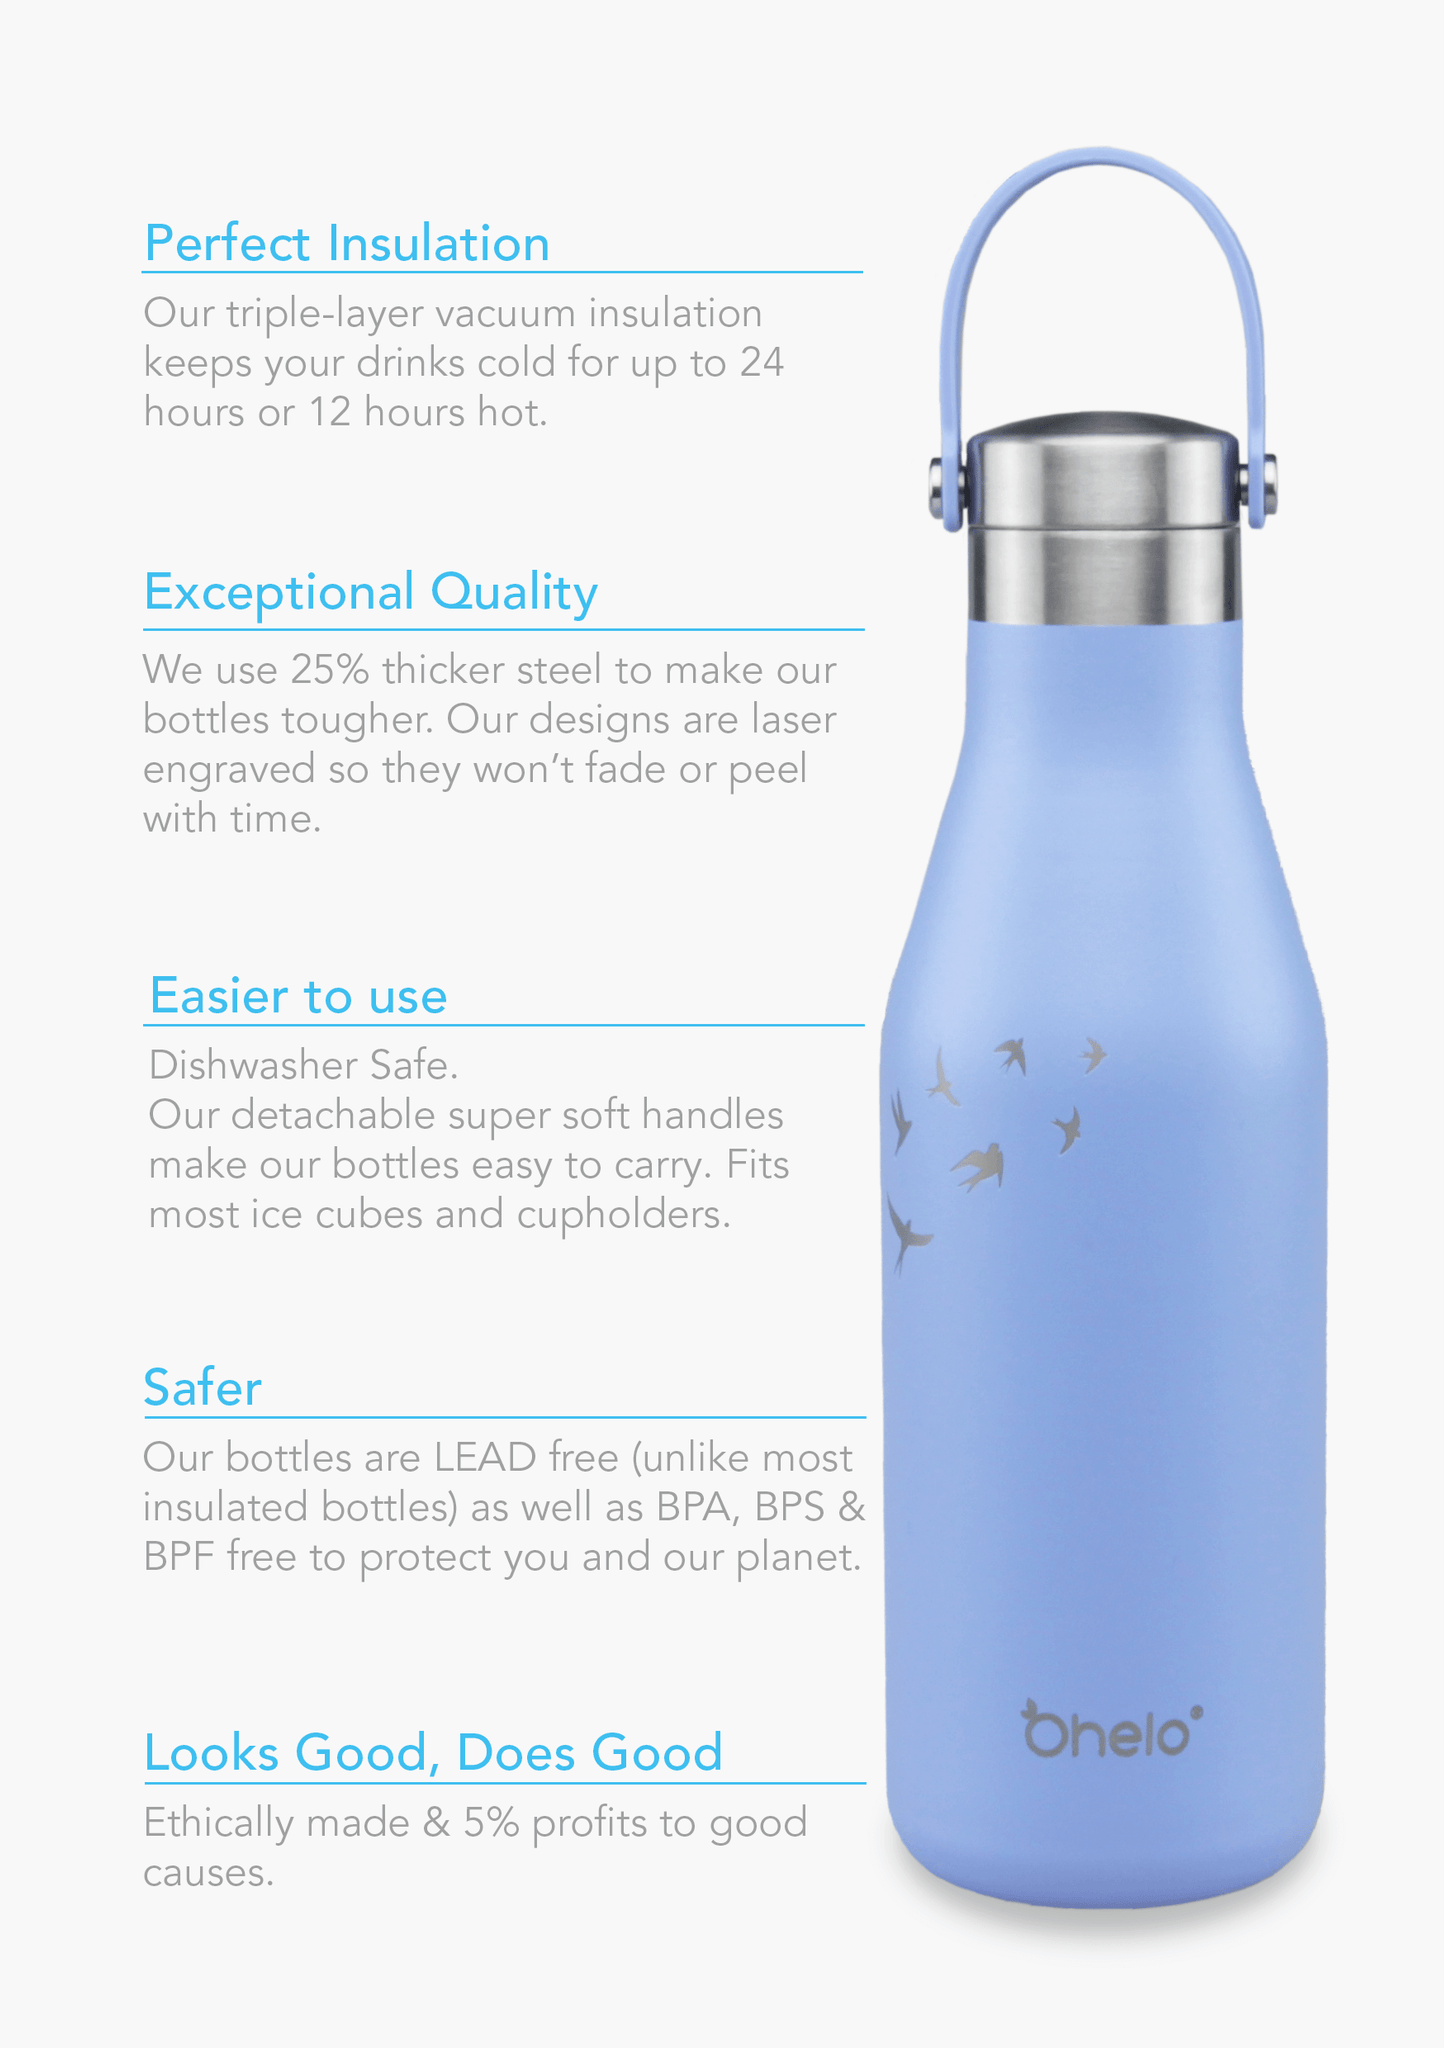 USPs for Ohelo insulated stainless steel reusable water bottle - perfect insulation, exceptional quality, easier to use, safer and looks good, does good